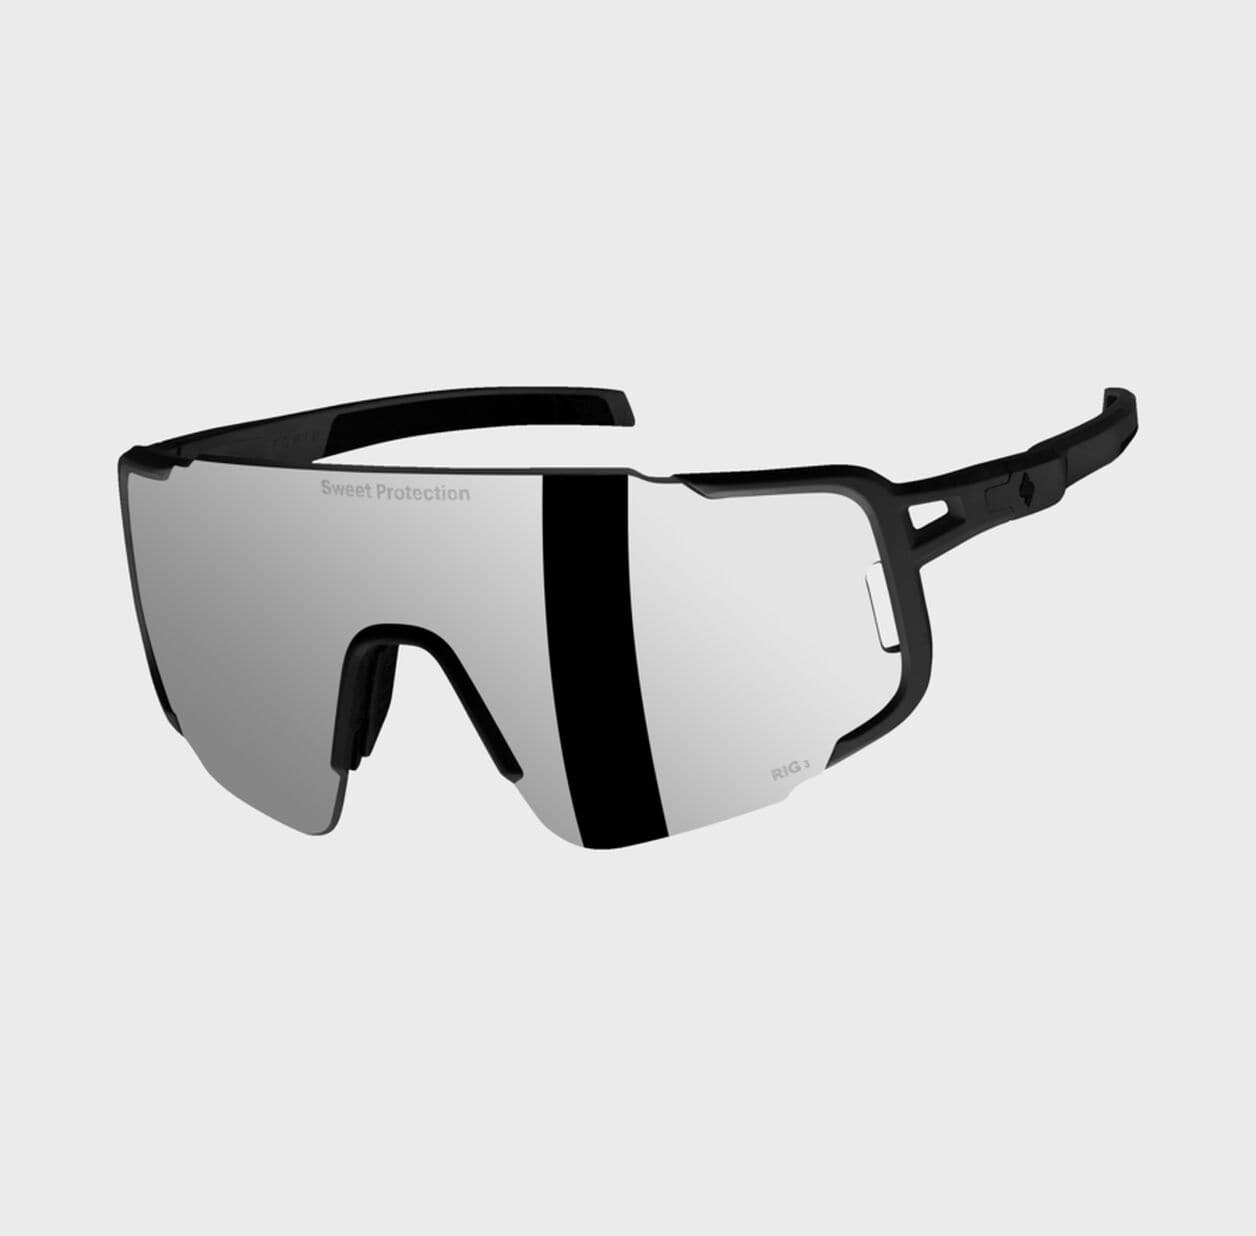 SWEET PROTECTION Eyewear Ronin Max RIG Reflect - Matte Black/Rig Obsidian Default sweet protection 